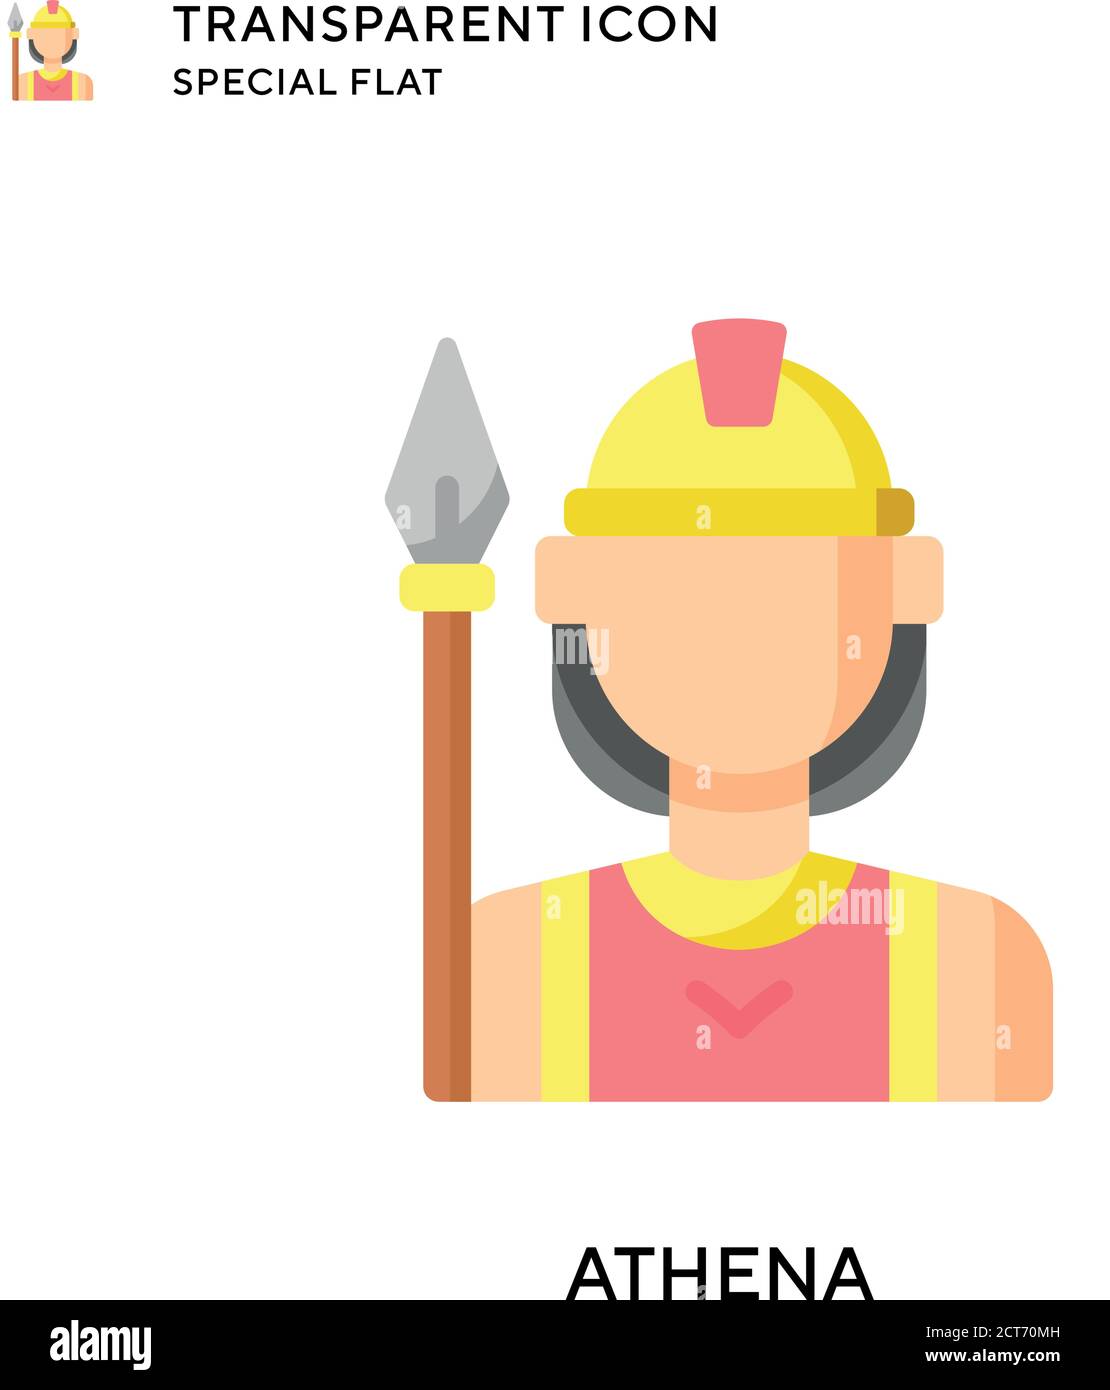 Athena vector icon. Flat style illustration. EPS 10 vector. Stock Vector